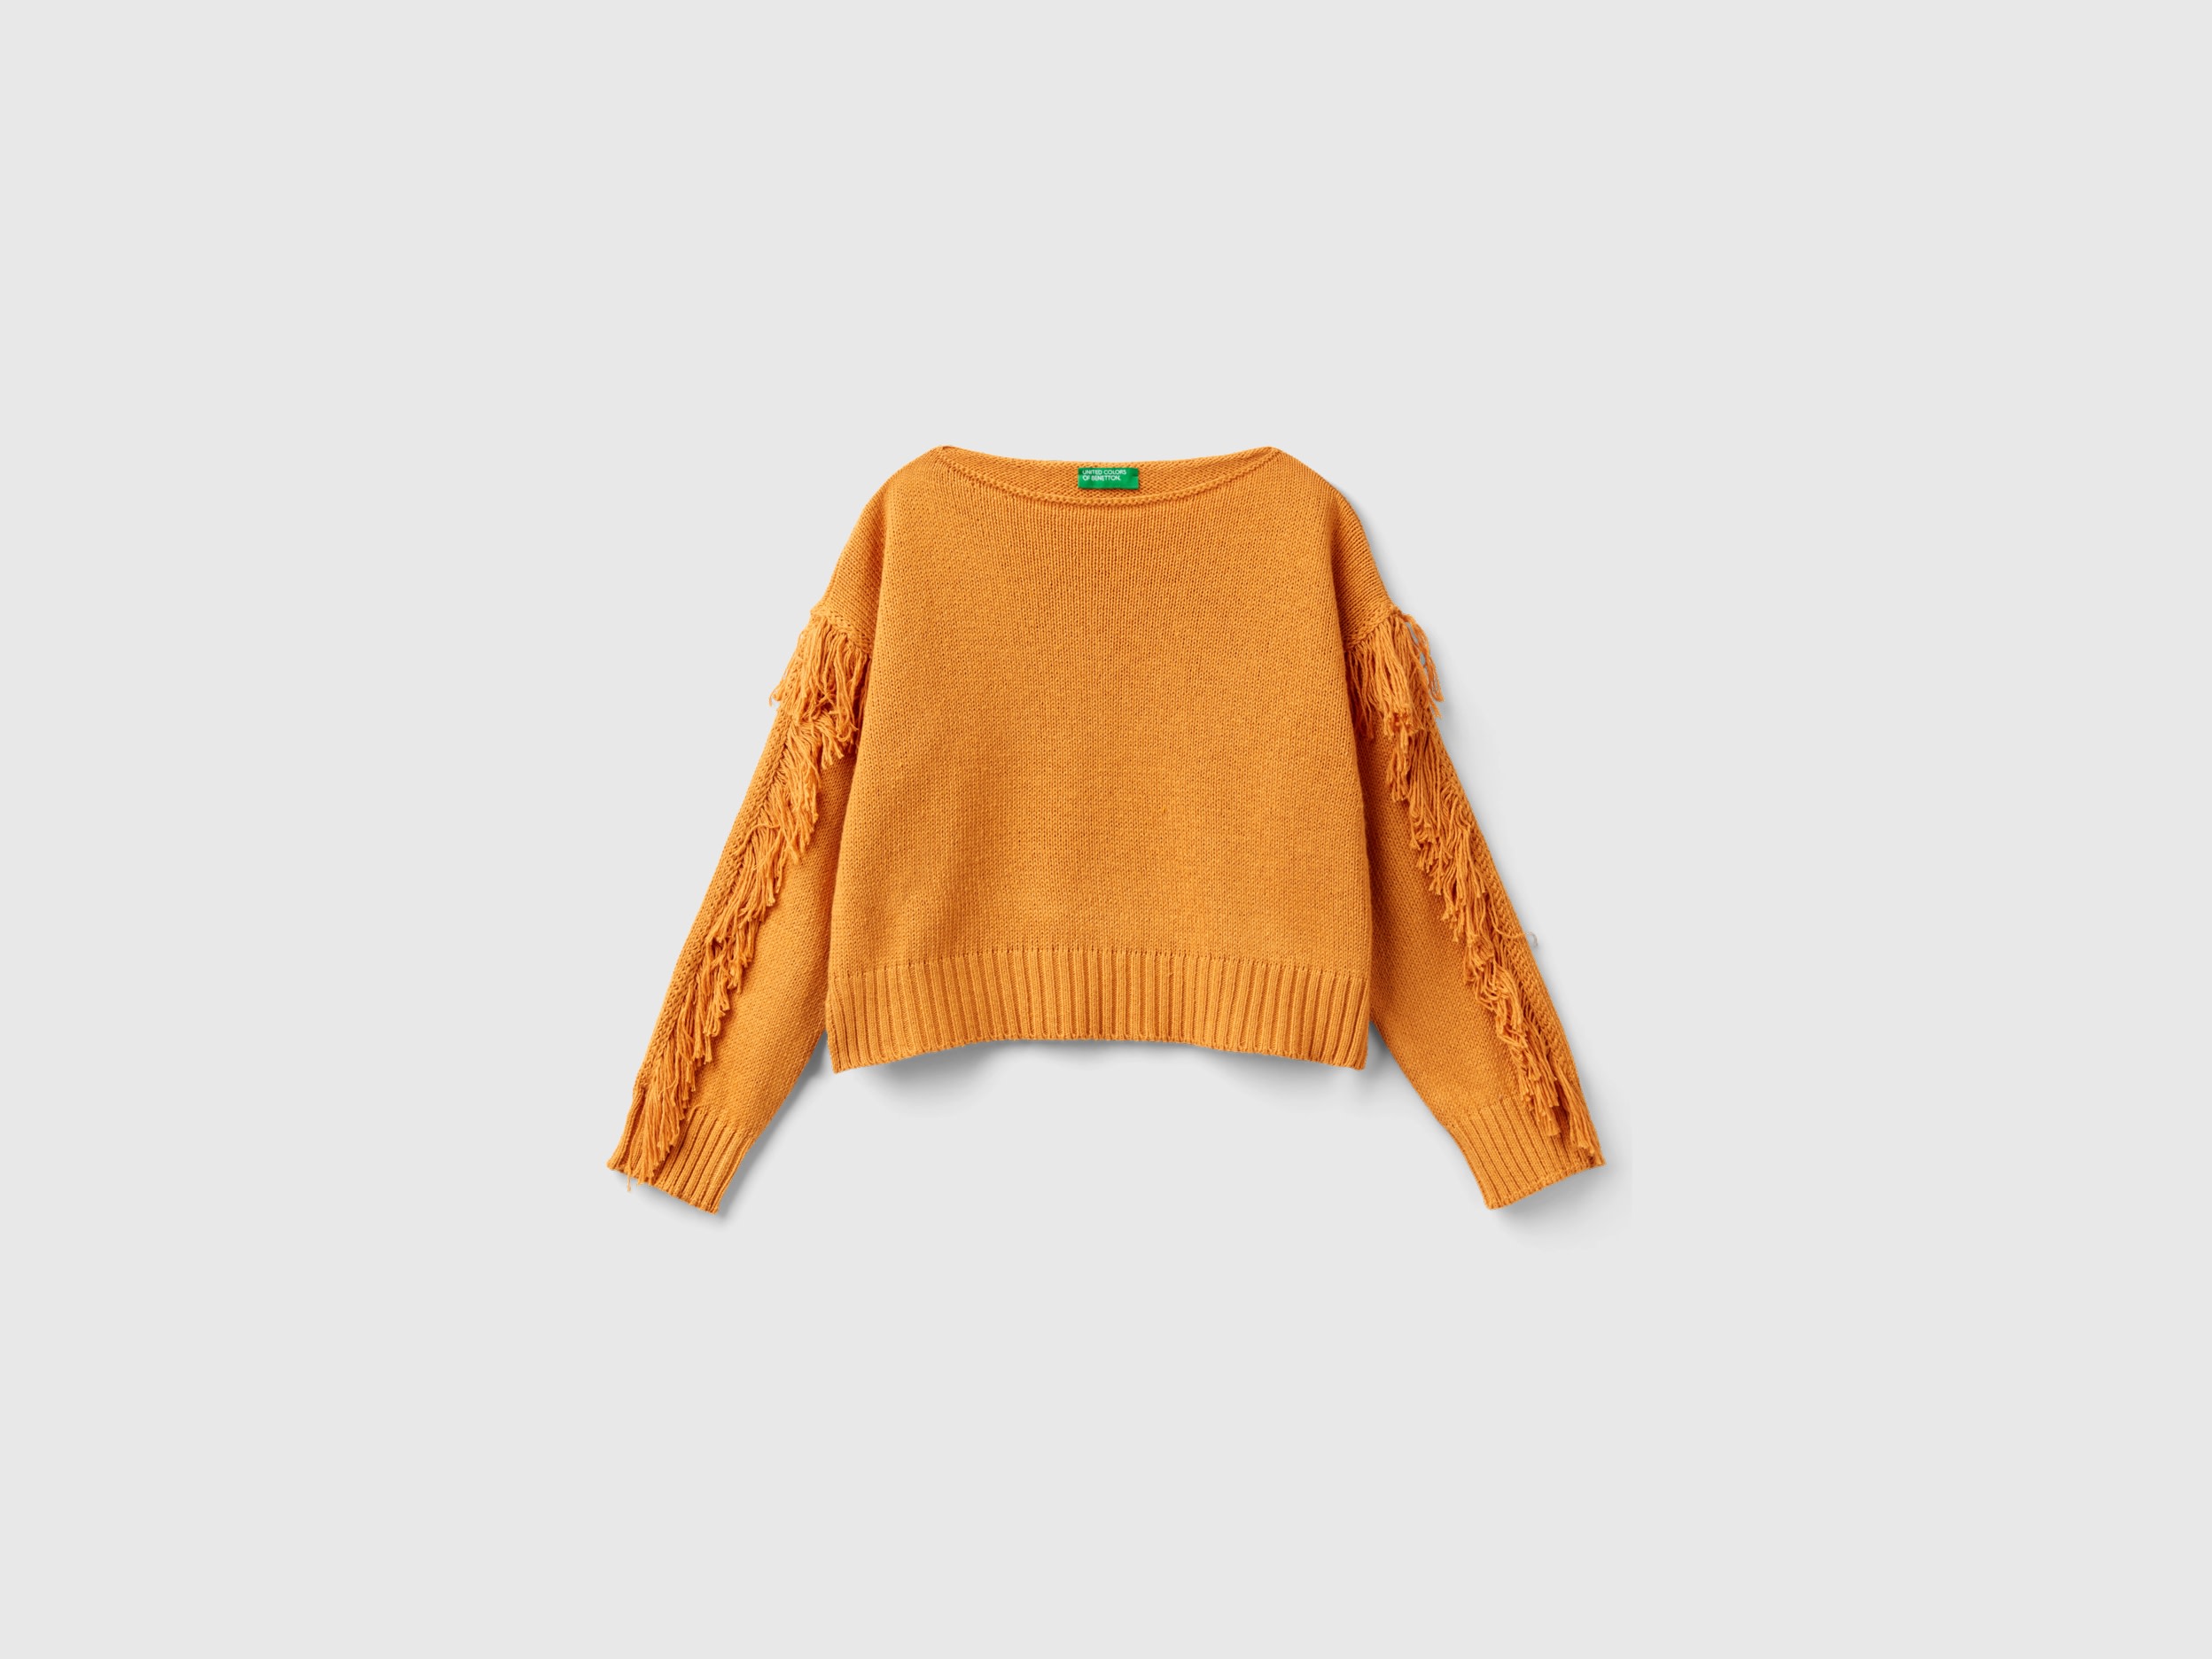 Image of Benetton, Sweater With Fringe, size L, Camel, Kids